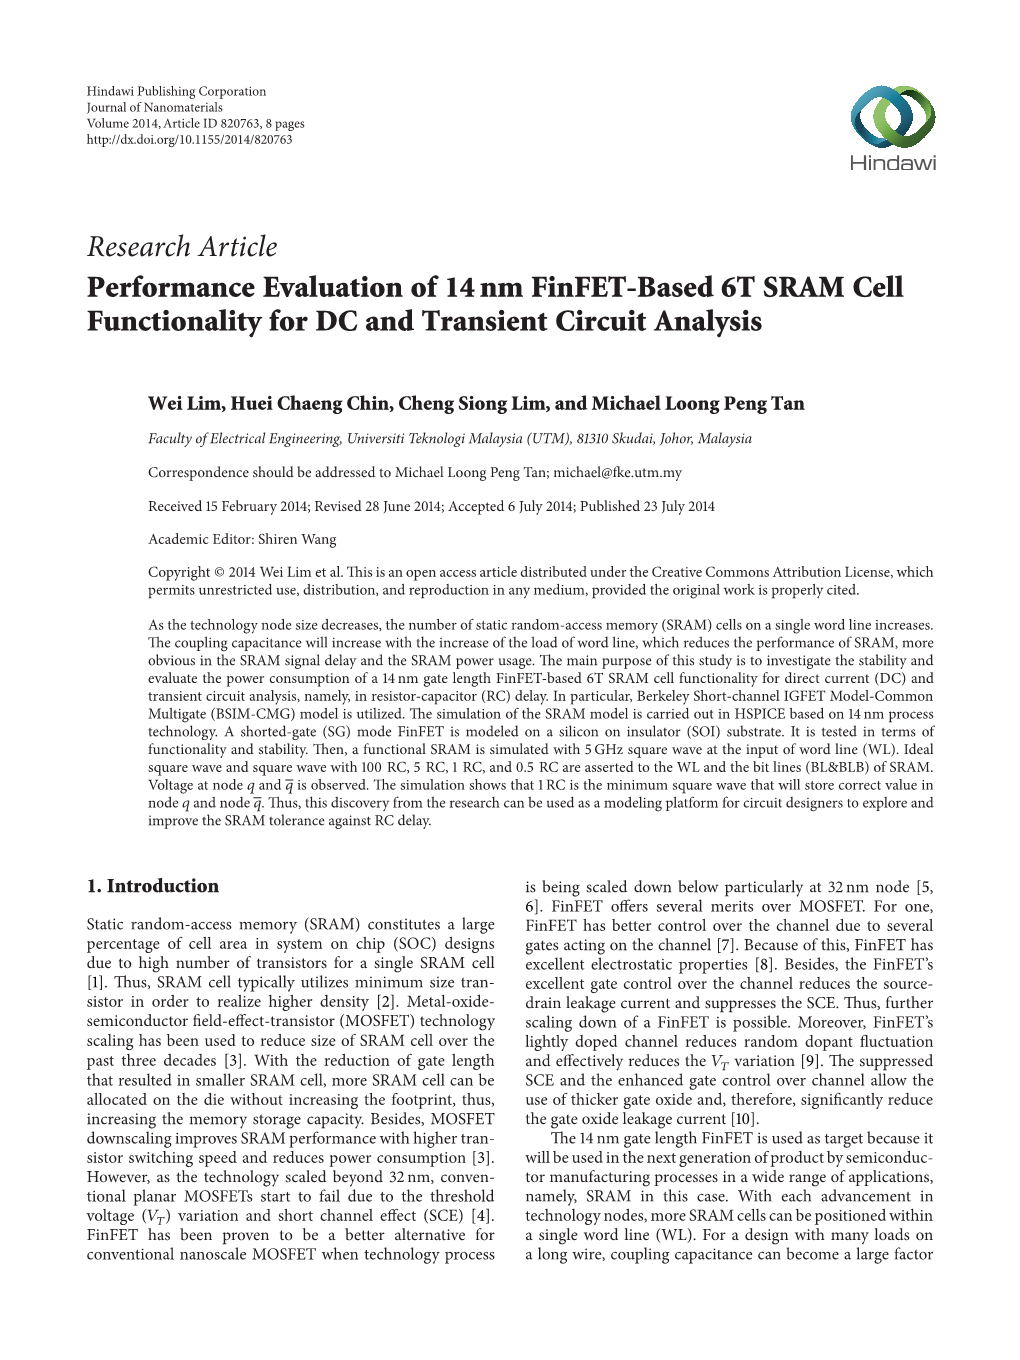 Performance Evaluation of 14 Nm Finfet-Based 6T SRAM Cell Functionality for DC and Transient Circuit Analysis